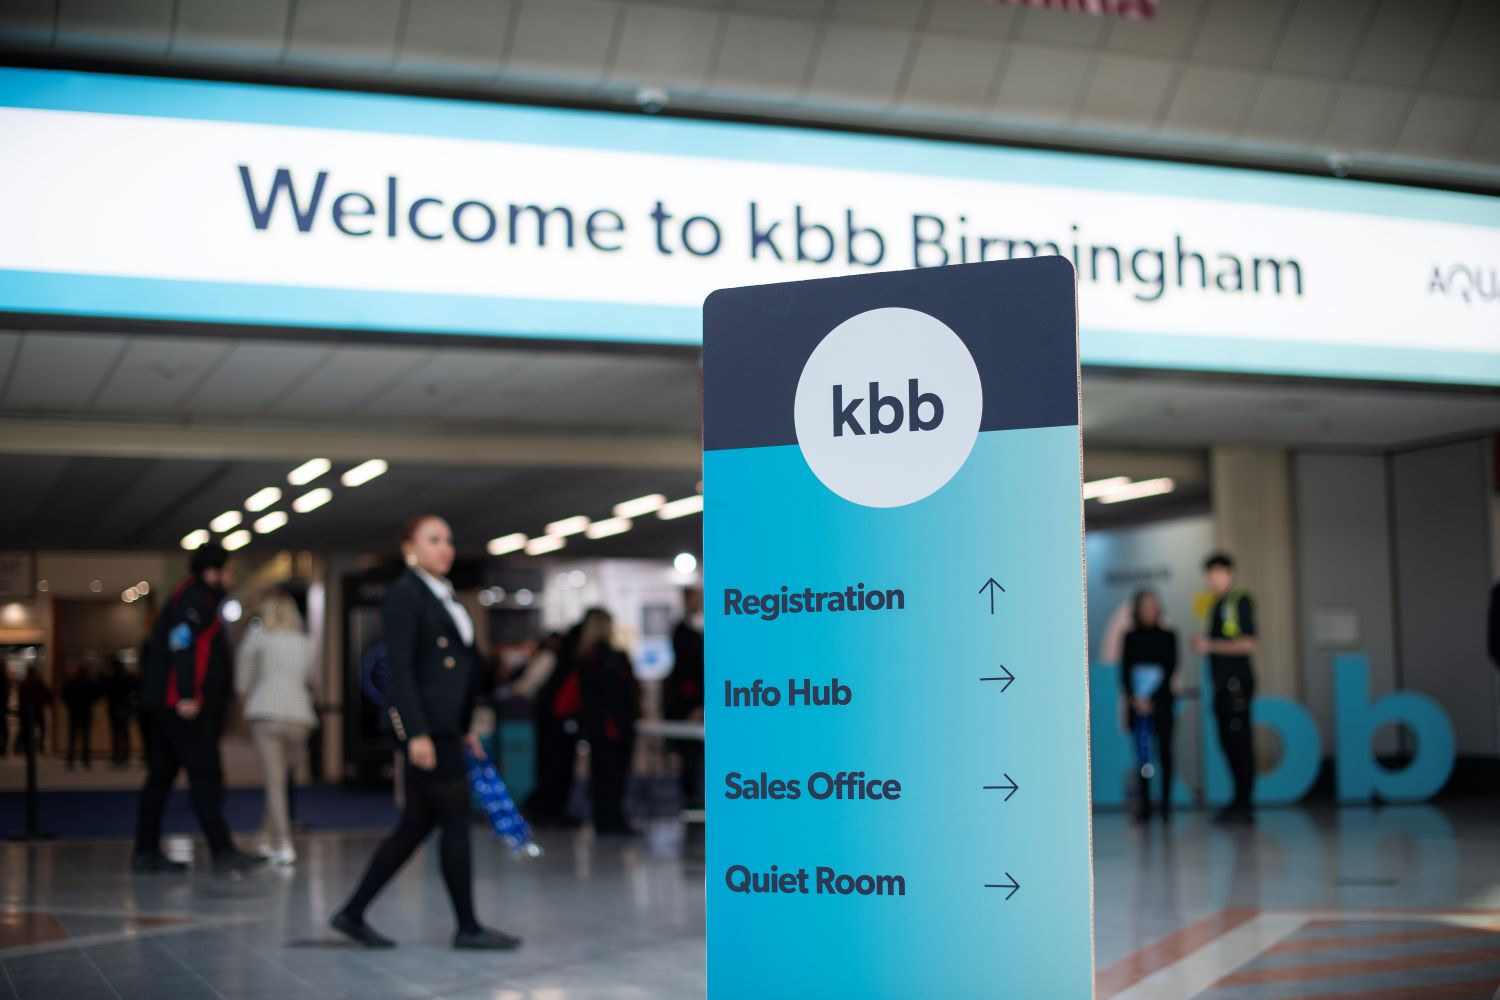 Kbb Birmingham sign reports most successful show in ten years